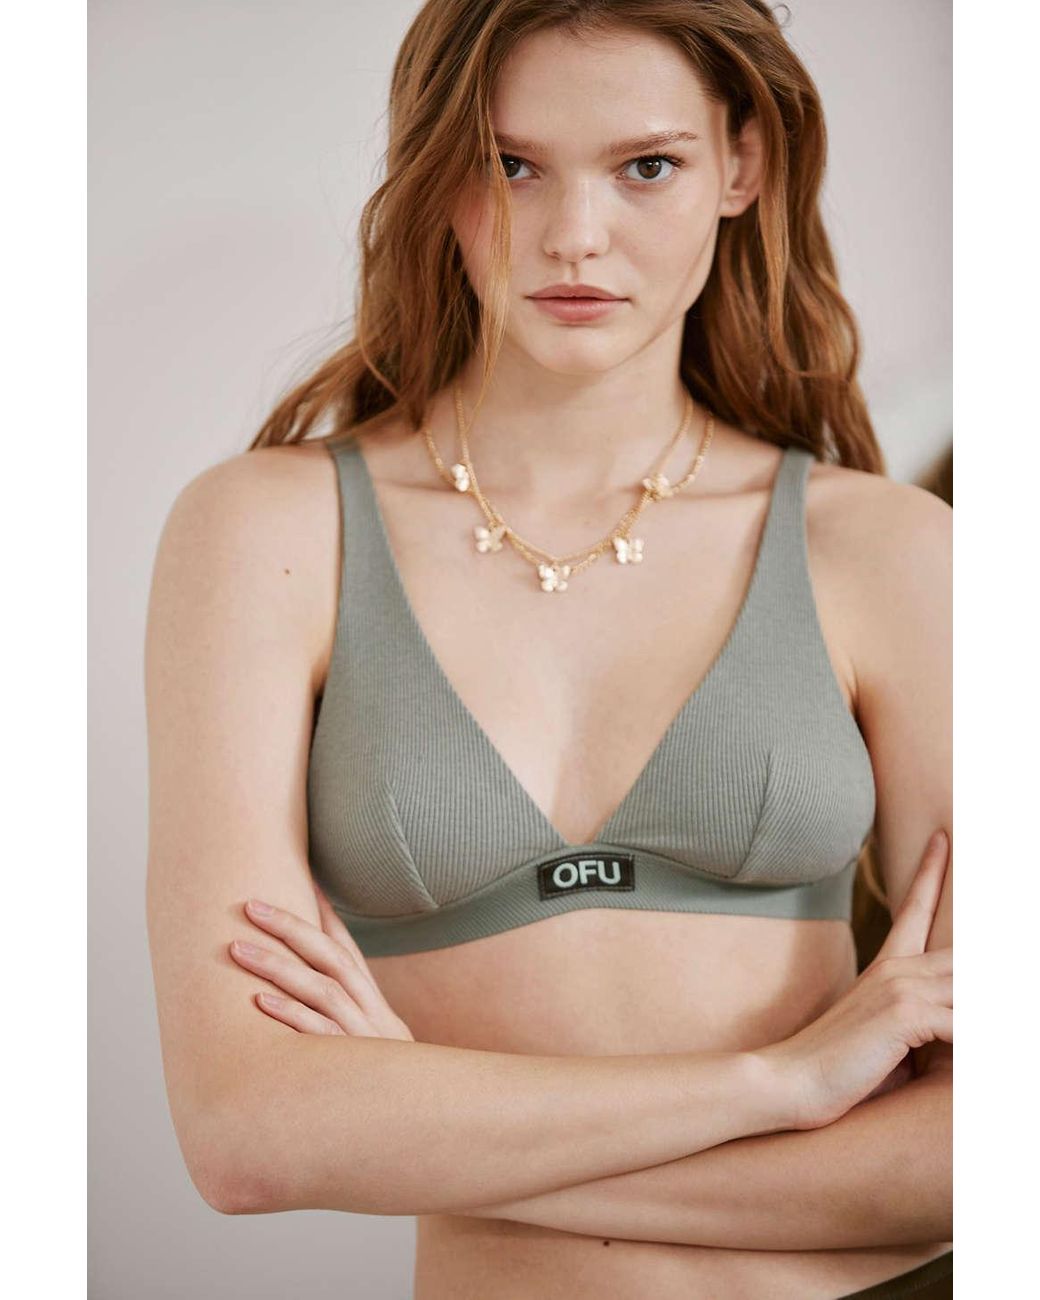 https://cdna.lystit.com/1040/1300/n/photos/urbanoutfitters/30c4d05b/out-from-under-Khaki-Ribbed-Cotton-Plunge-Bralette.jpeg